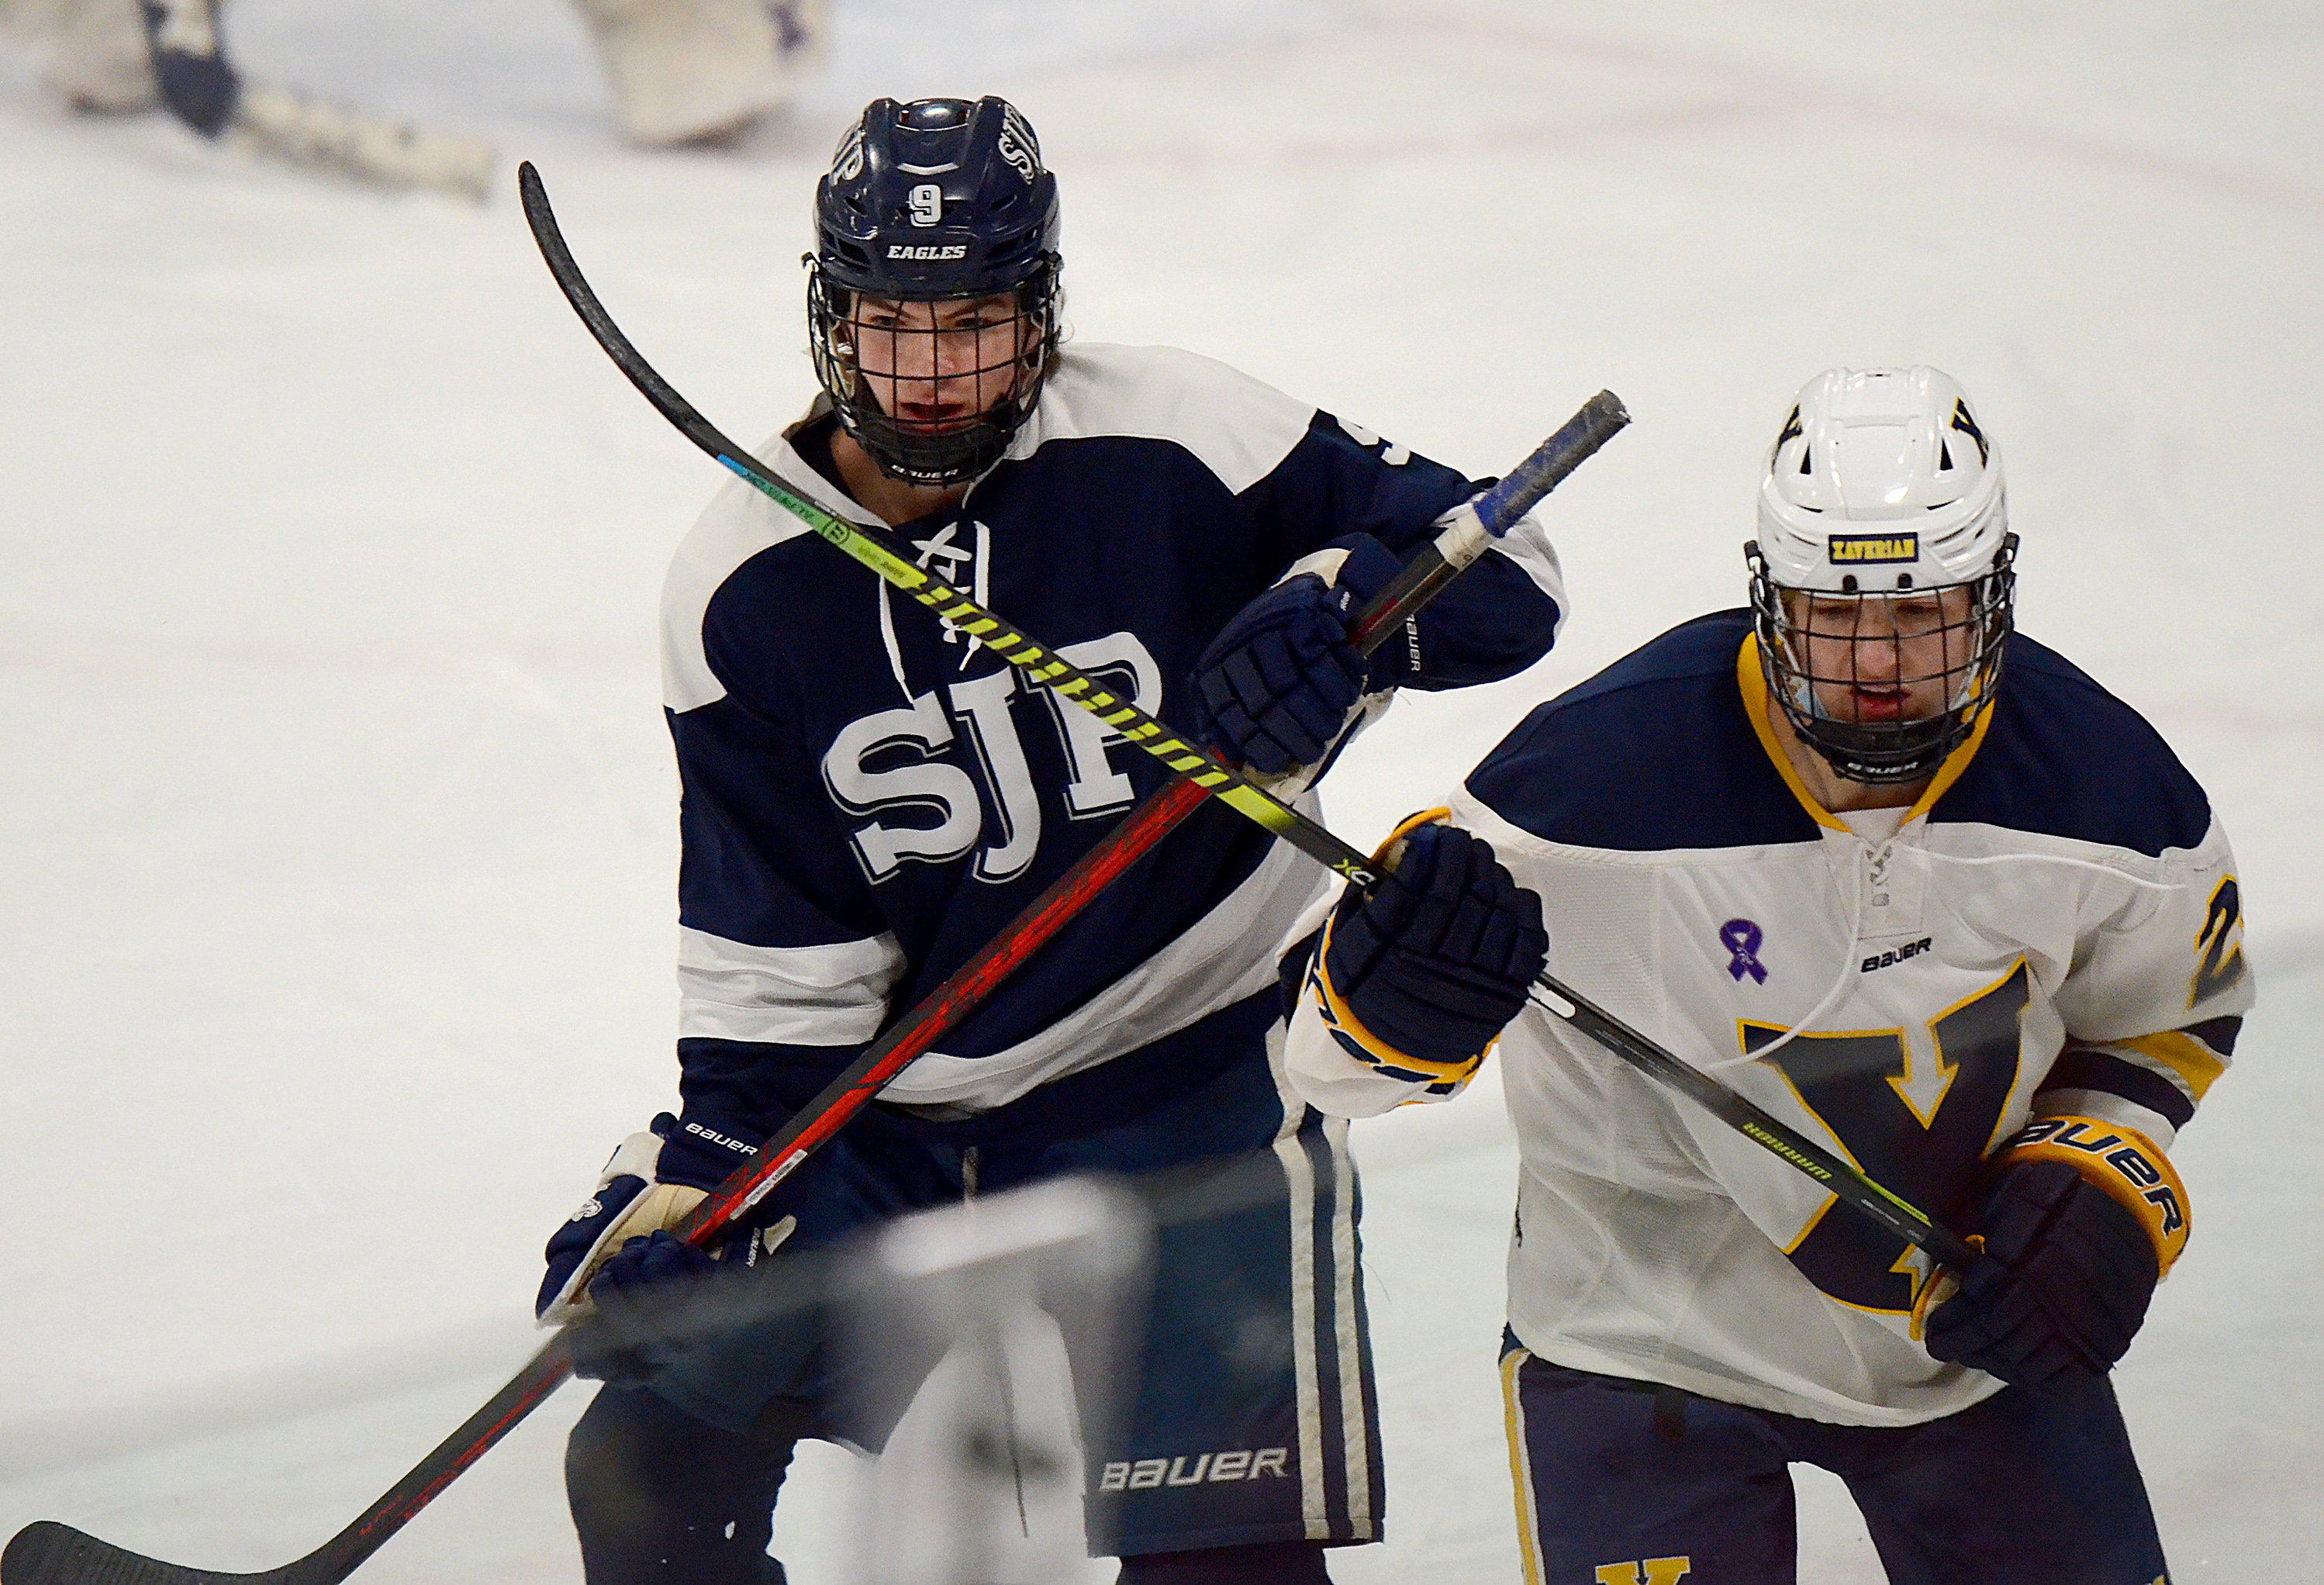 One big statement victory as St. John's Prep hockey takes down top